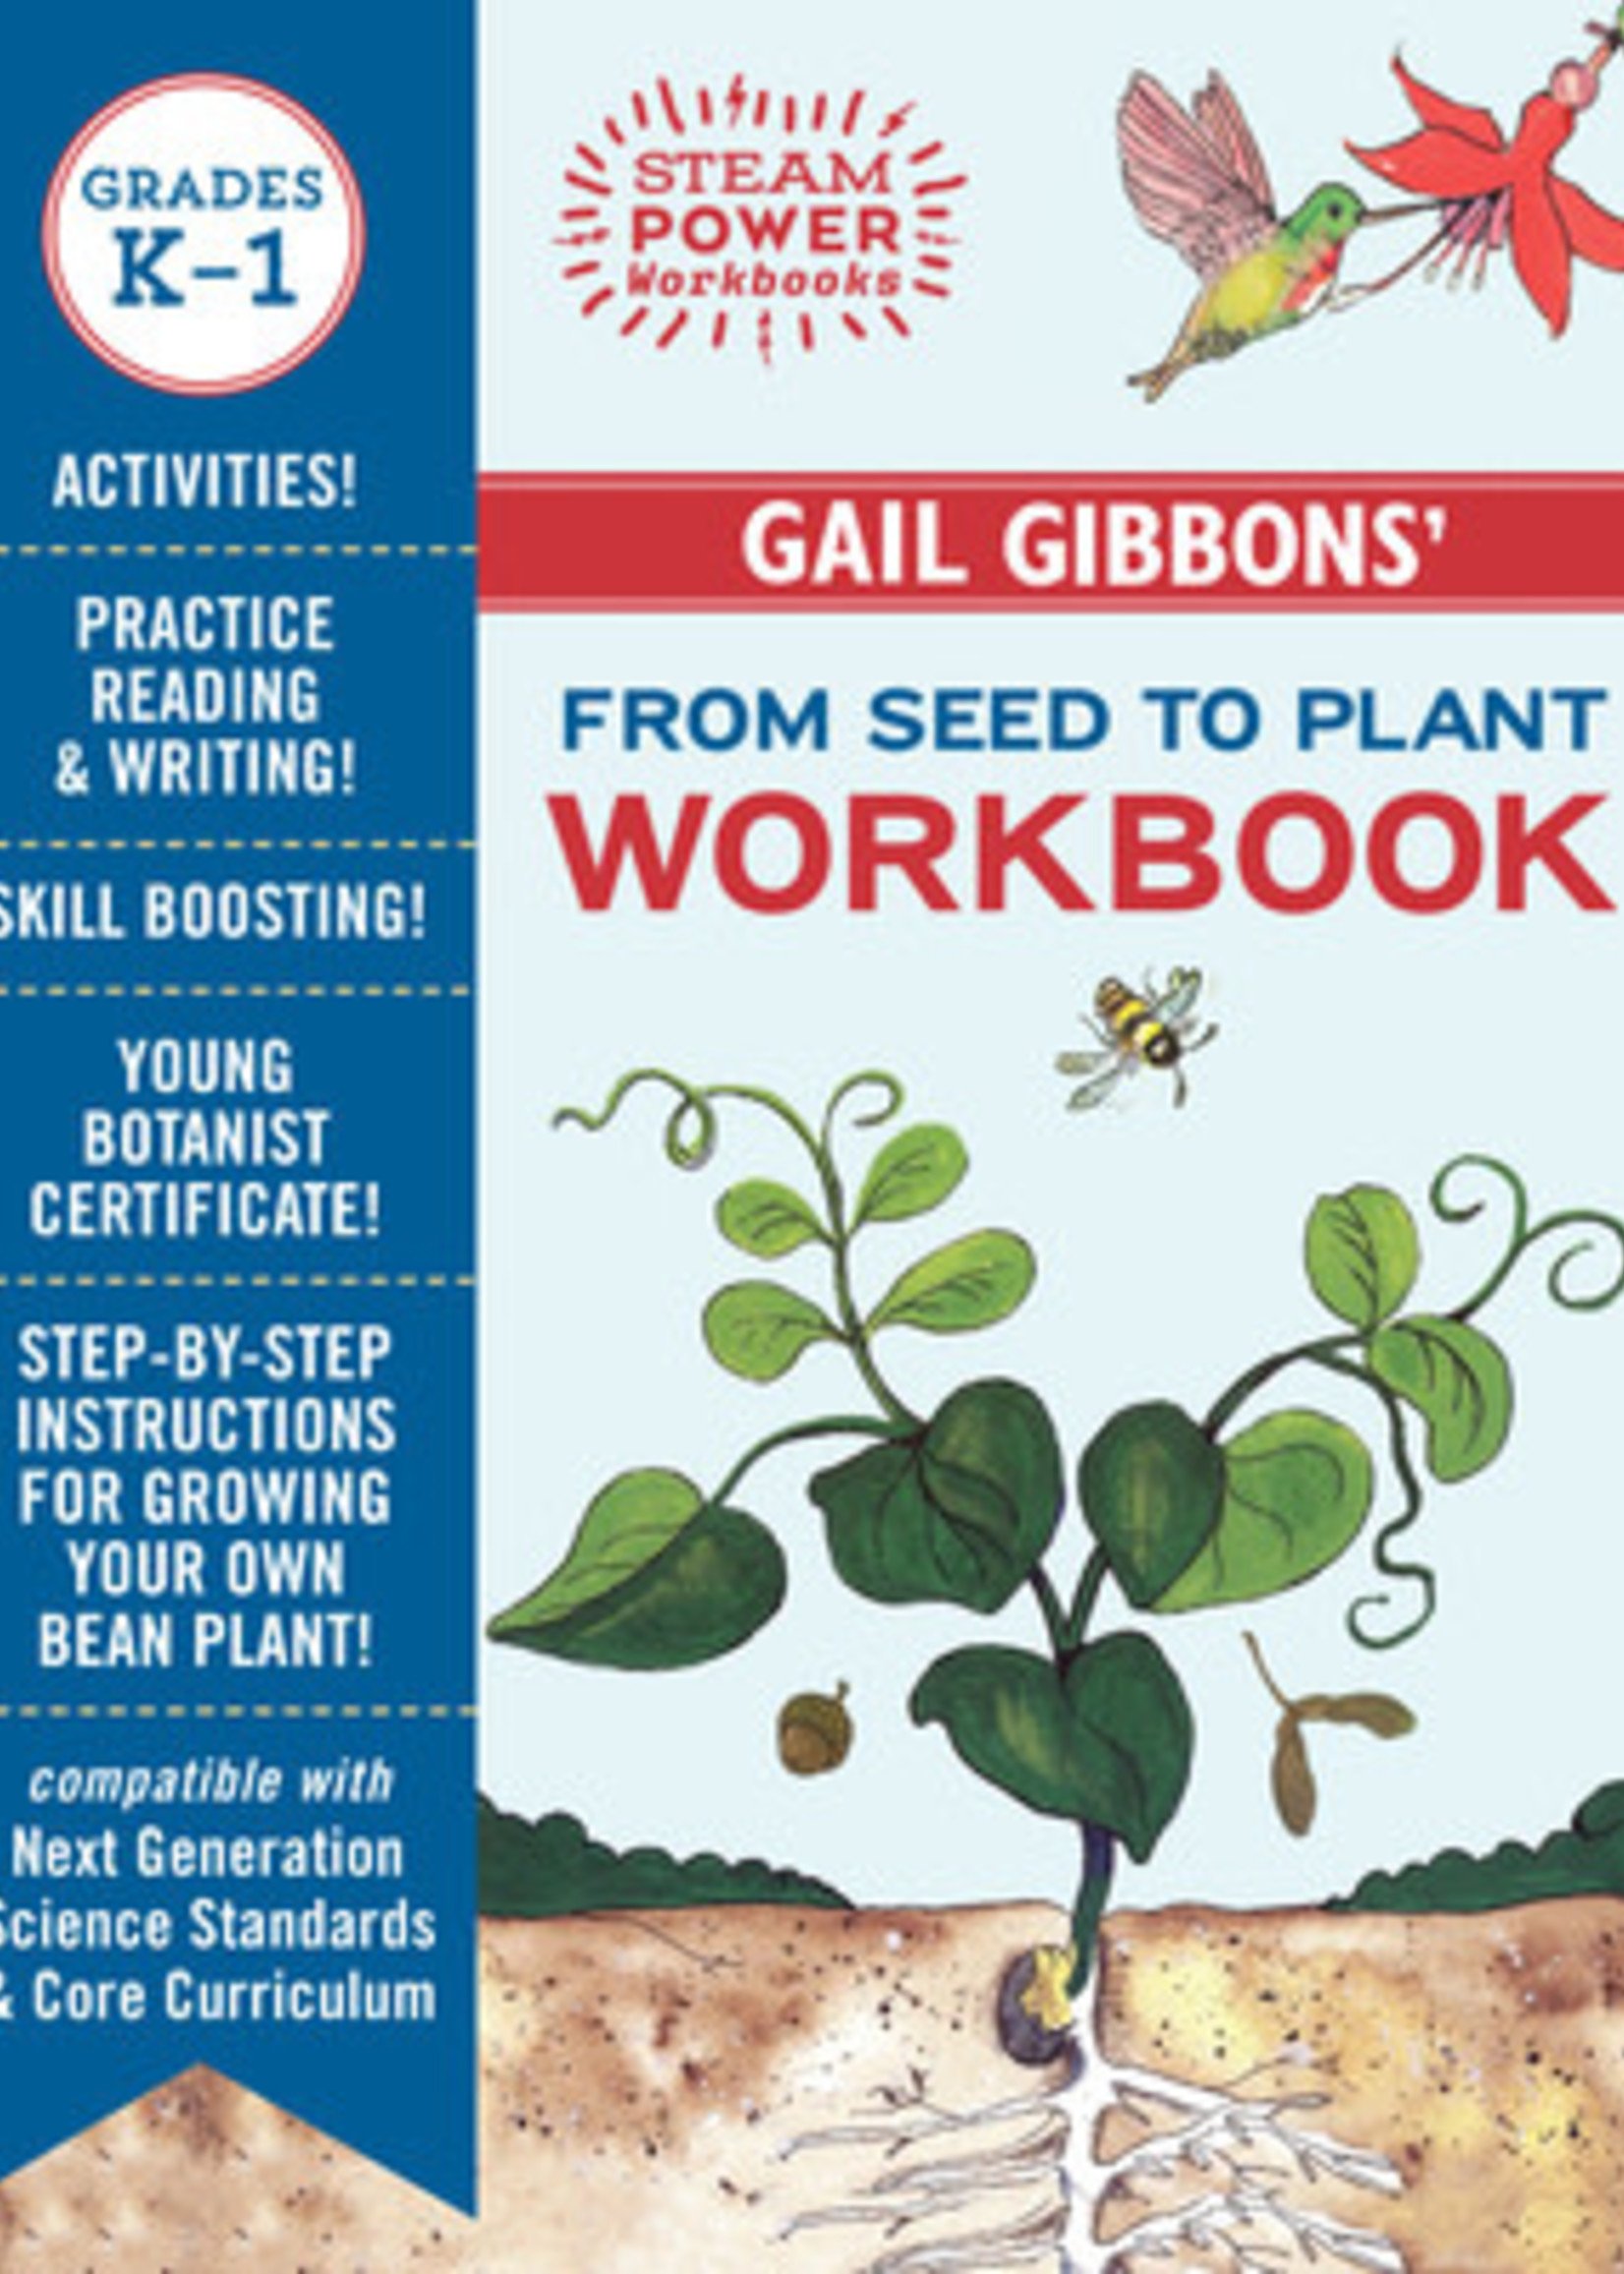 Gail Gibbons' from Seed to Plant Workbook by Gail Gibbons